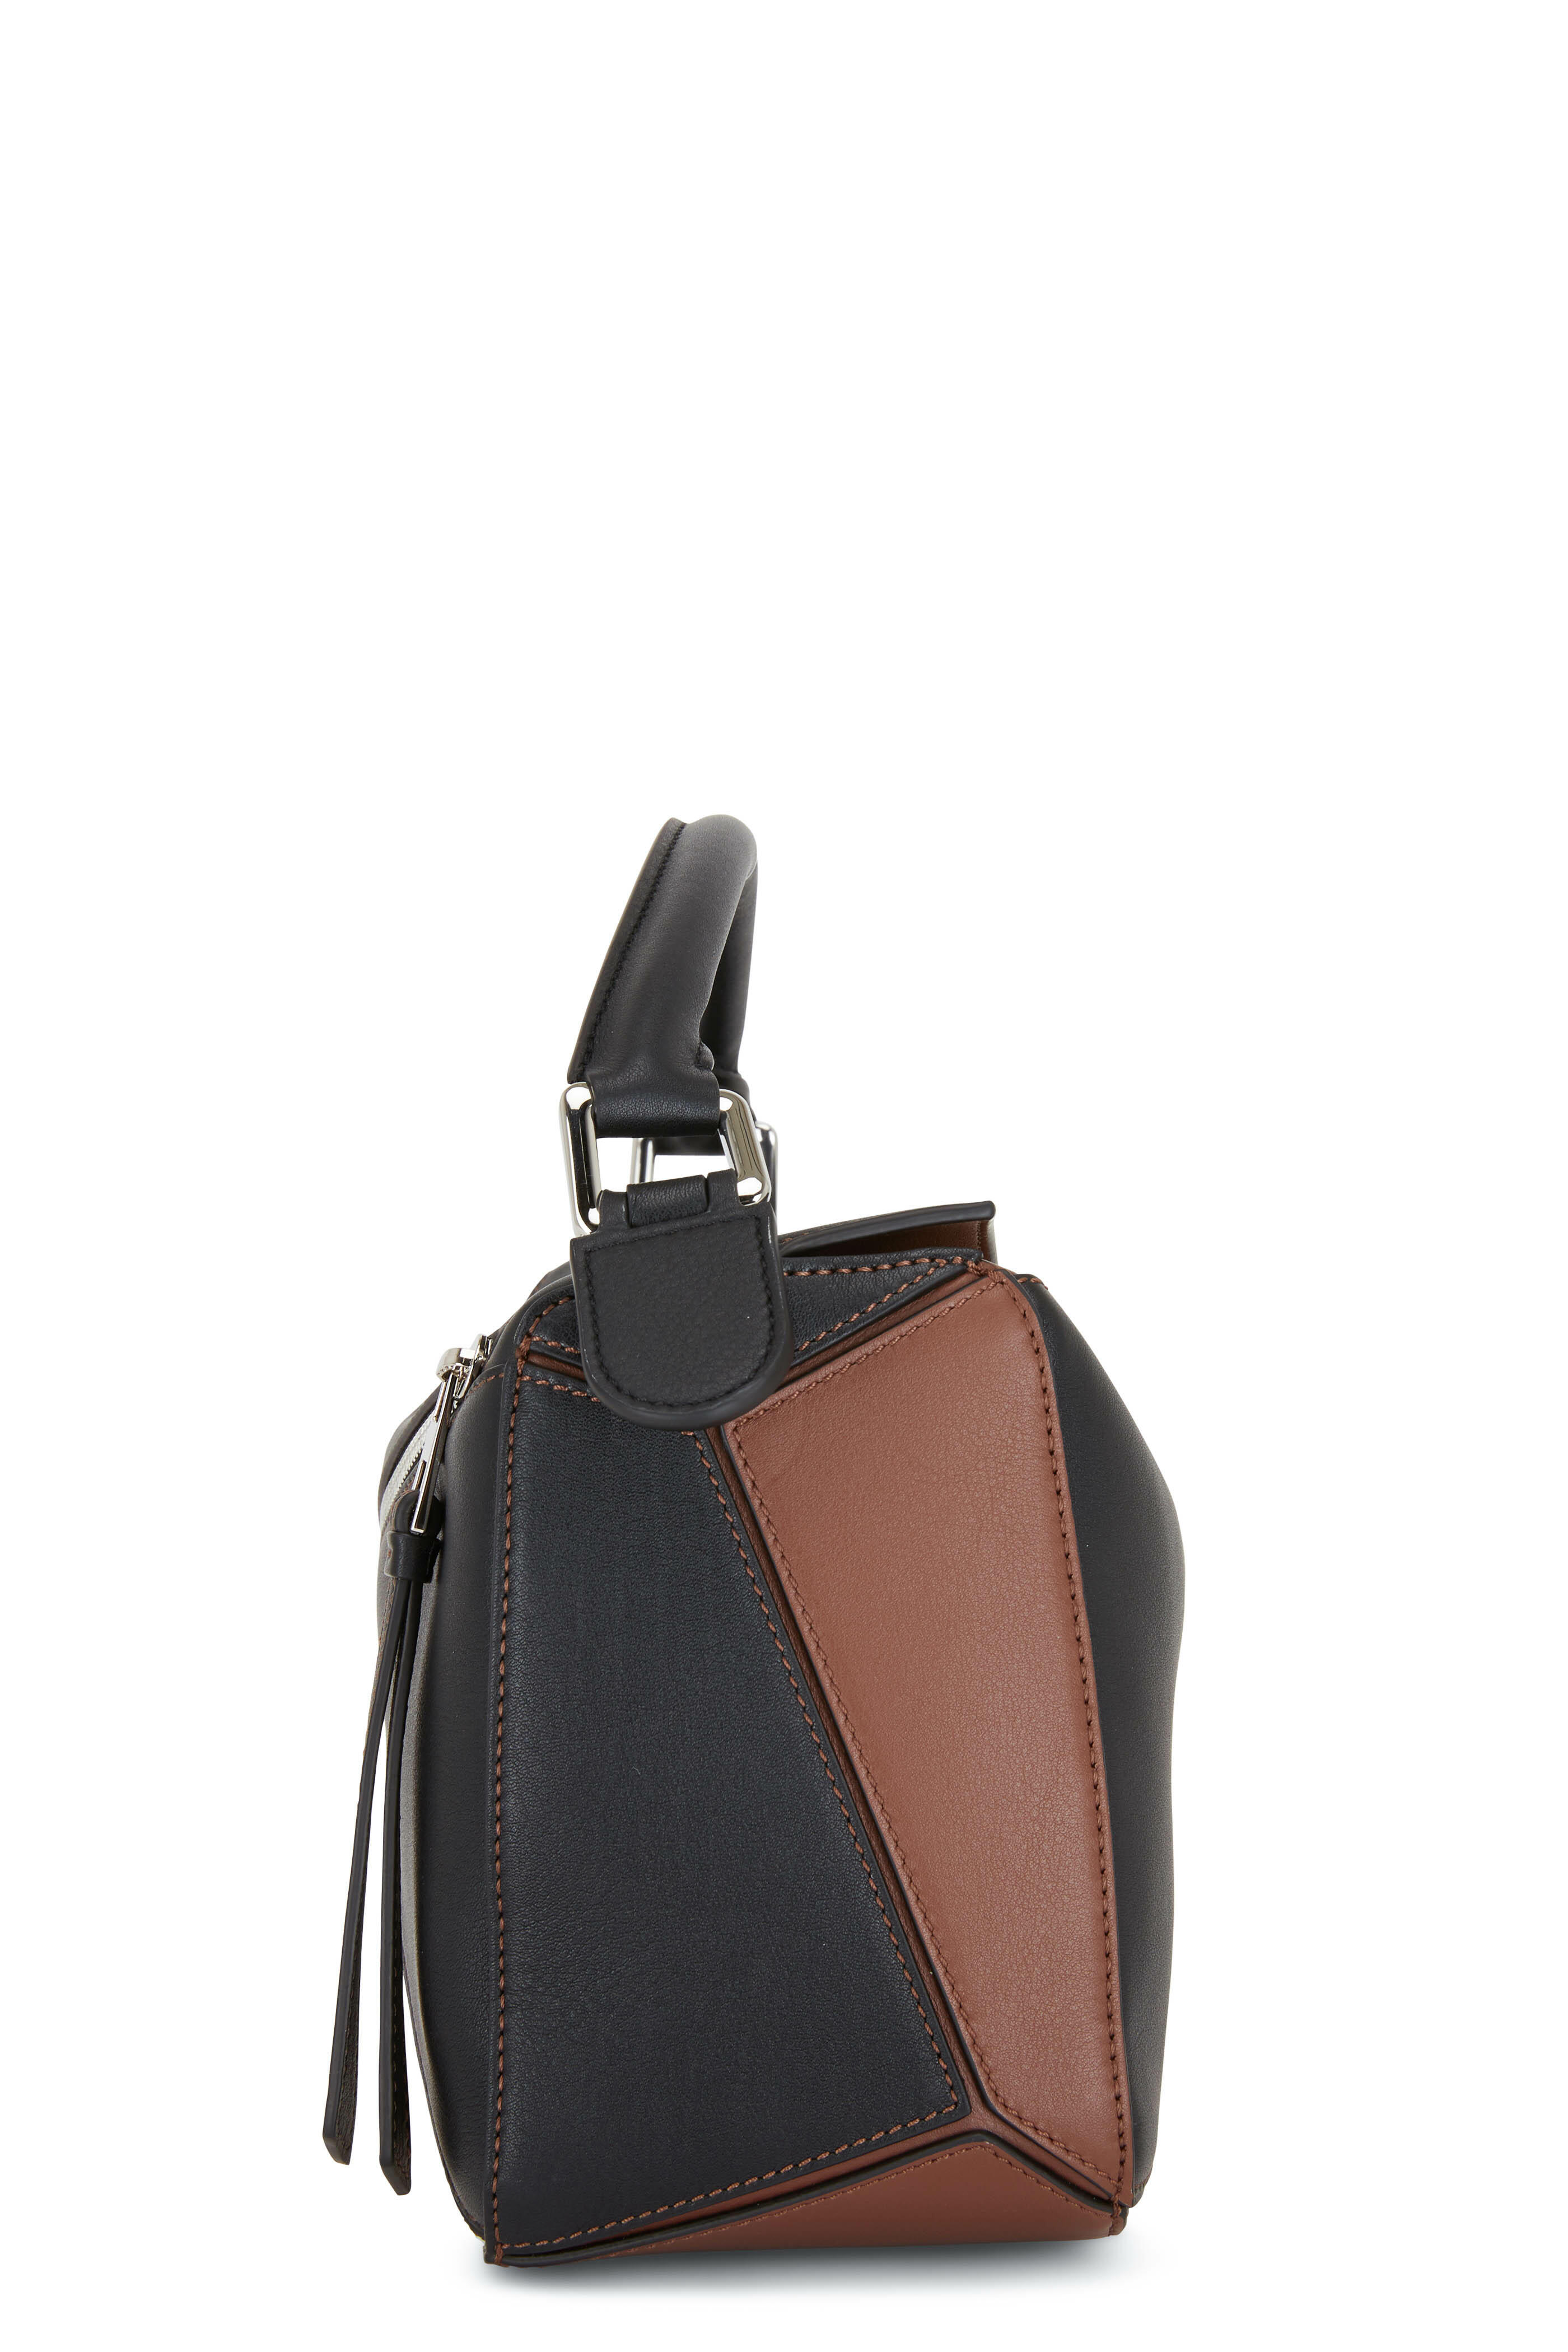 Loewe Puzzle Small Bag In Dark Taupe Leather in Brown